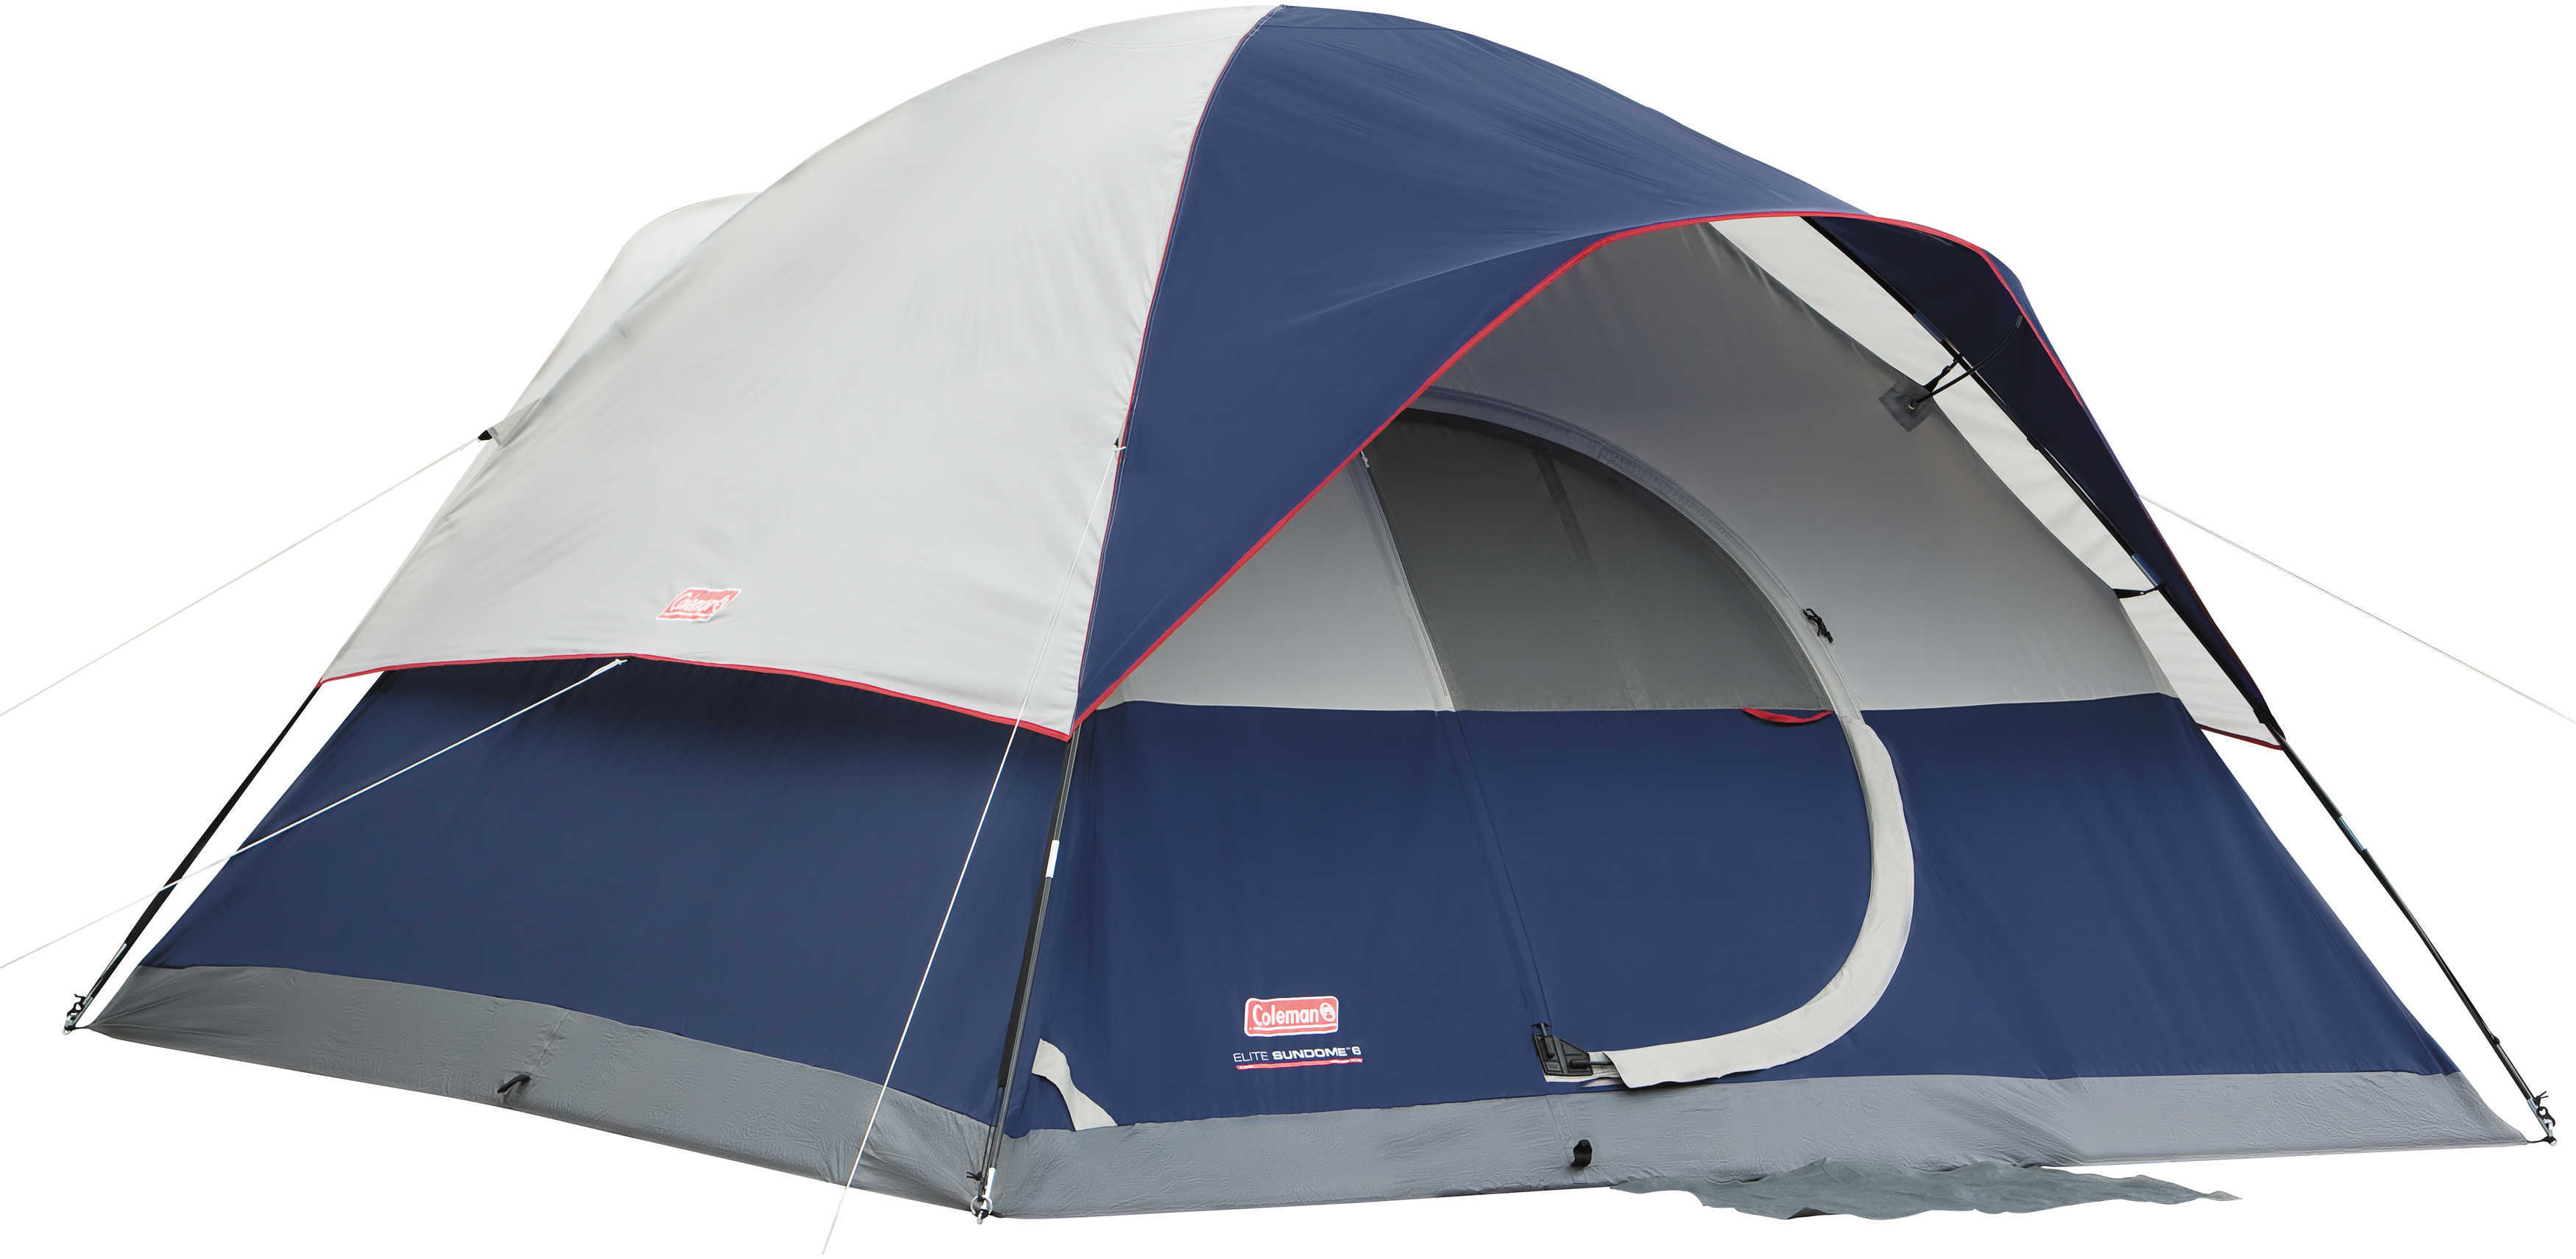 Coleman Tent 12X10 Elite Sundome 6 Person with LED Lighting